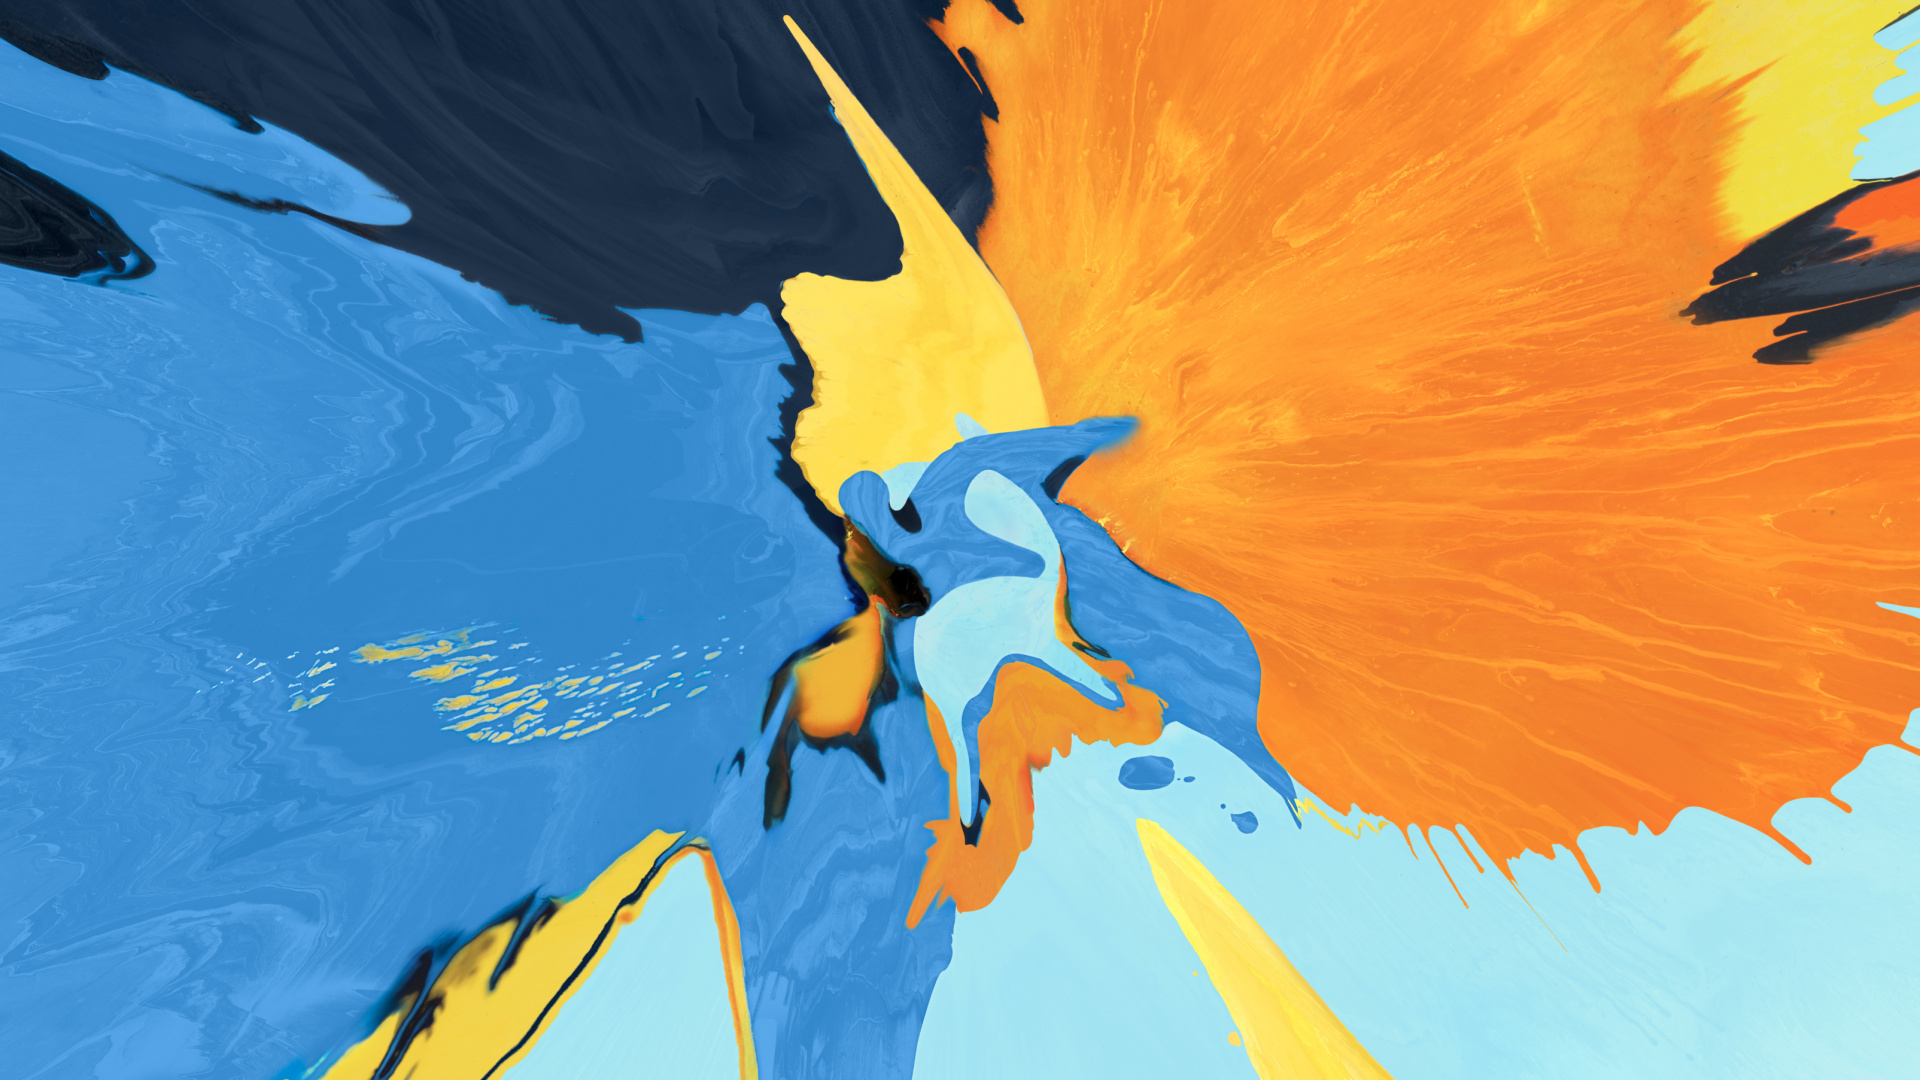 Blue Yellow and Black Bird Painting. Wallpaper in 1920x1080 Resolution